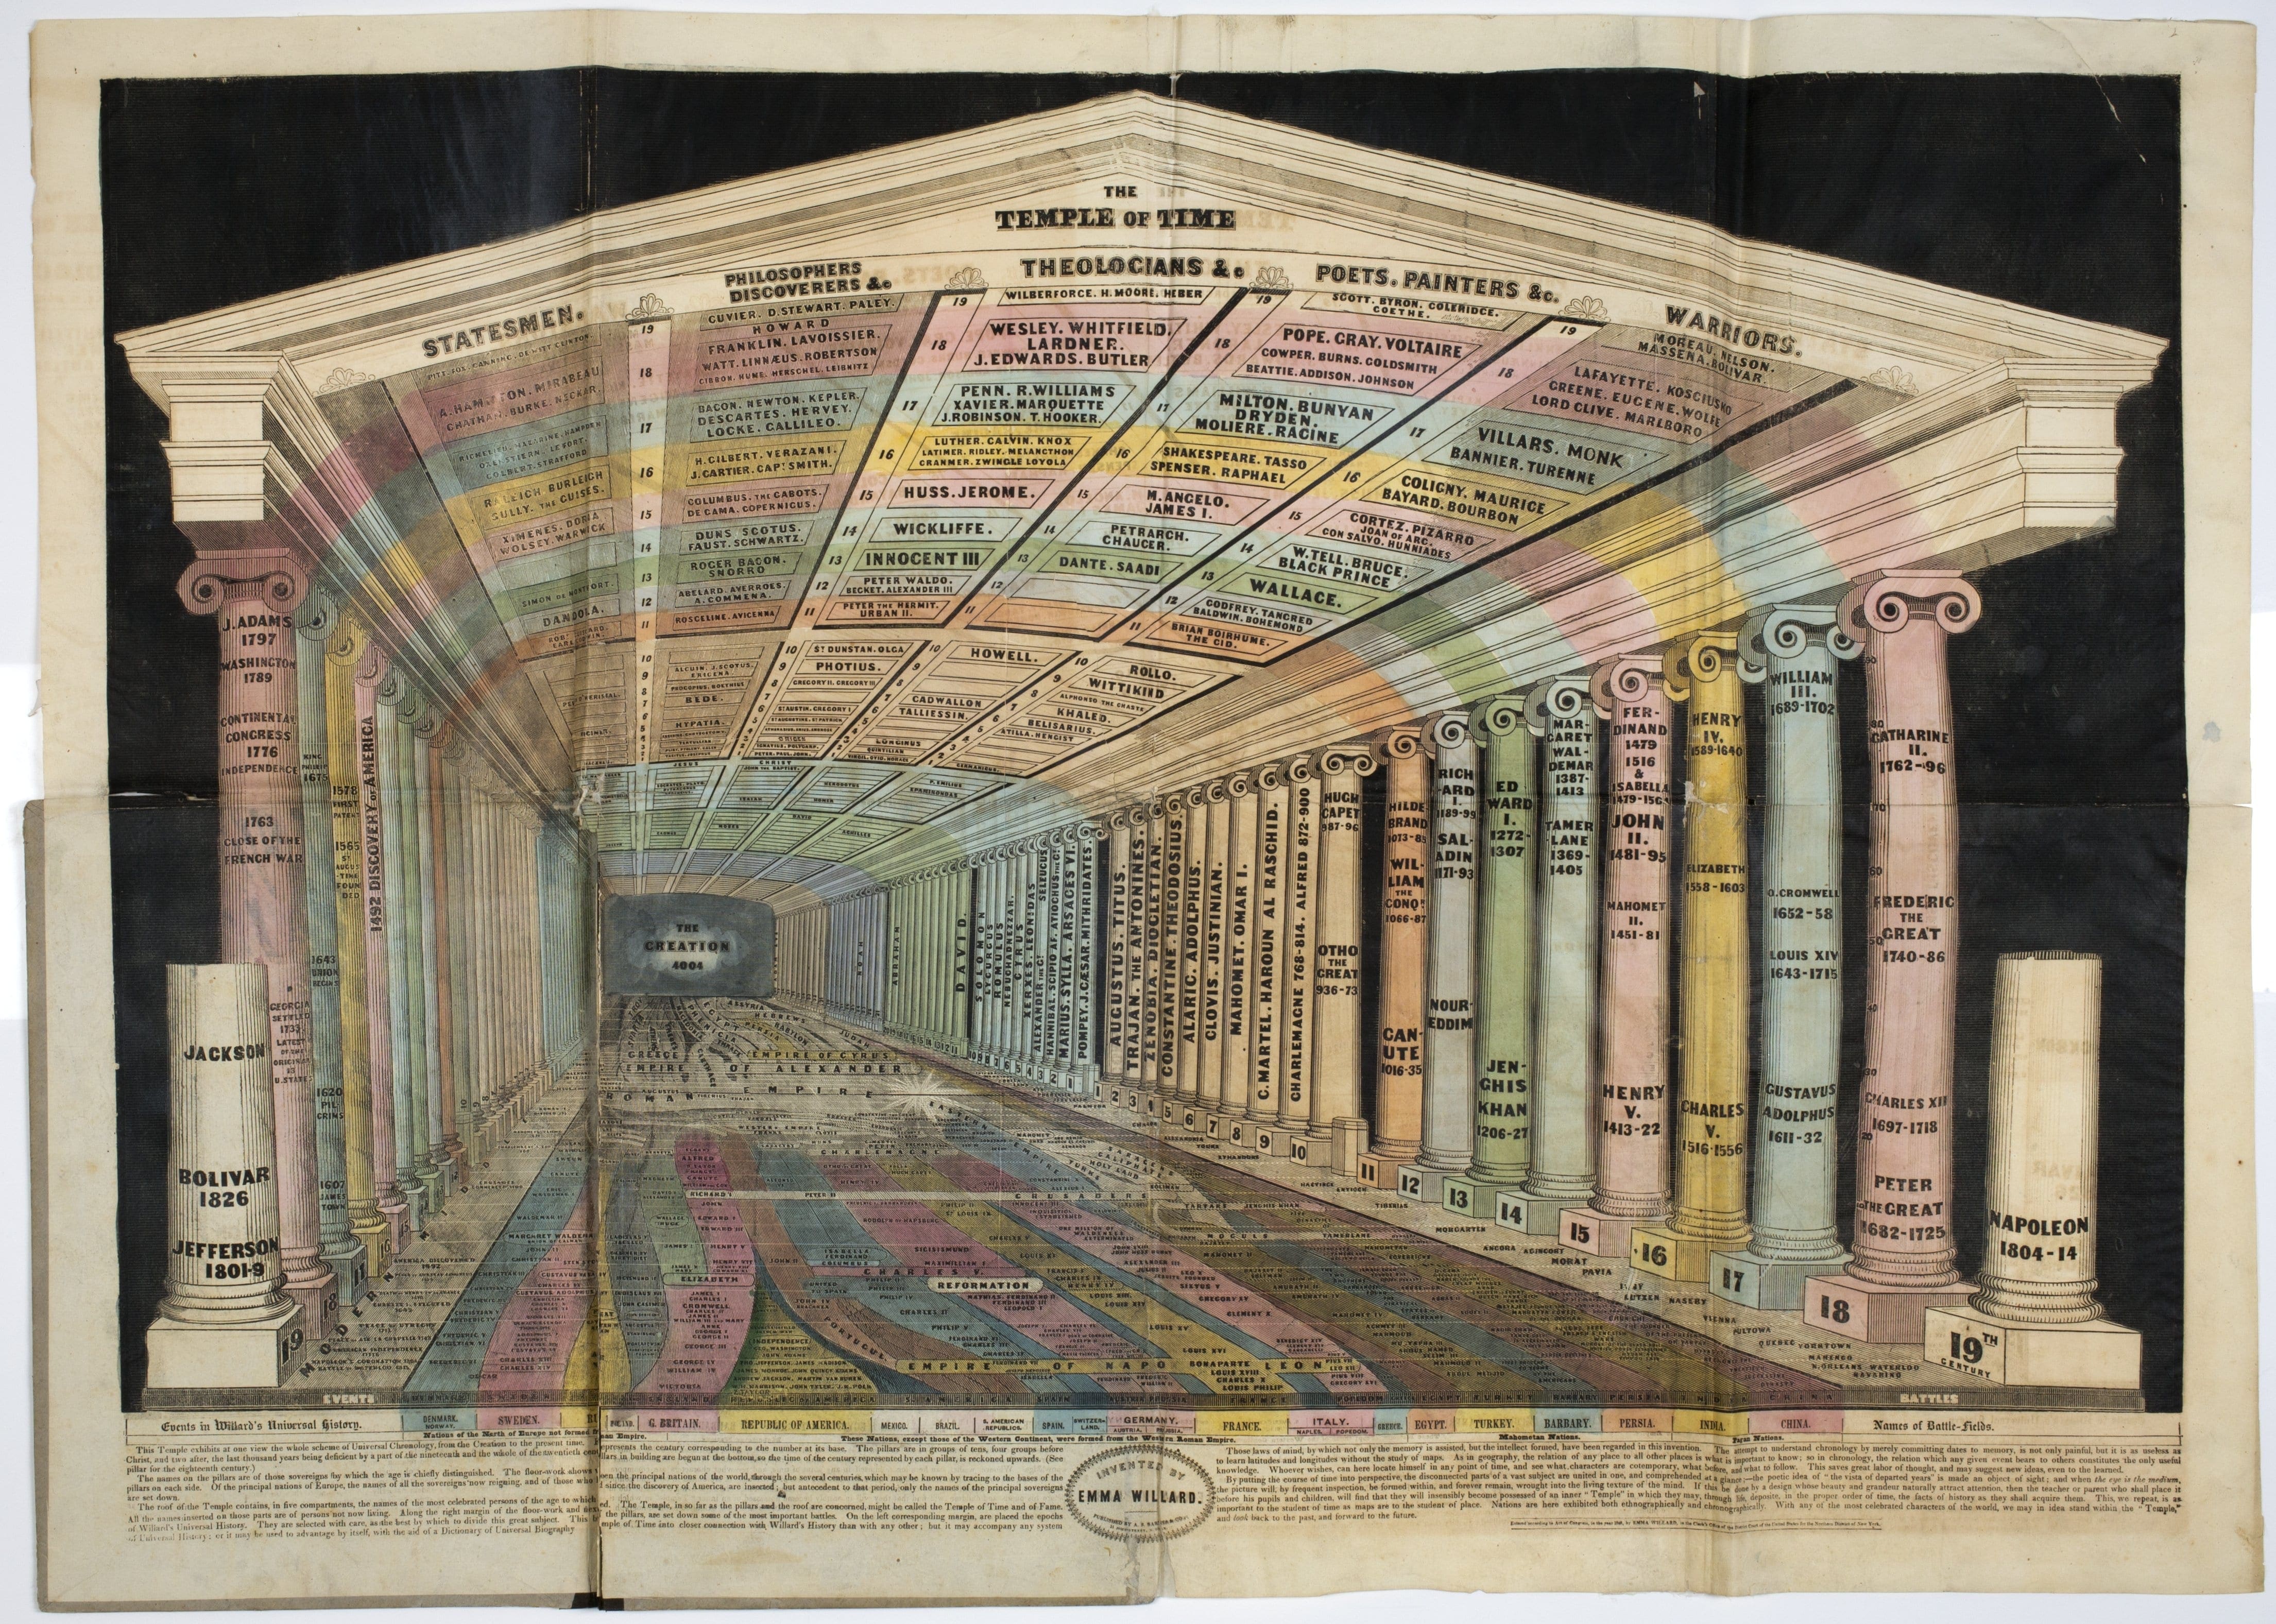 Temple of Time by Emma Willard, 1851